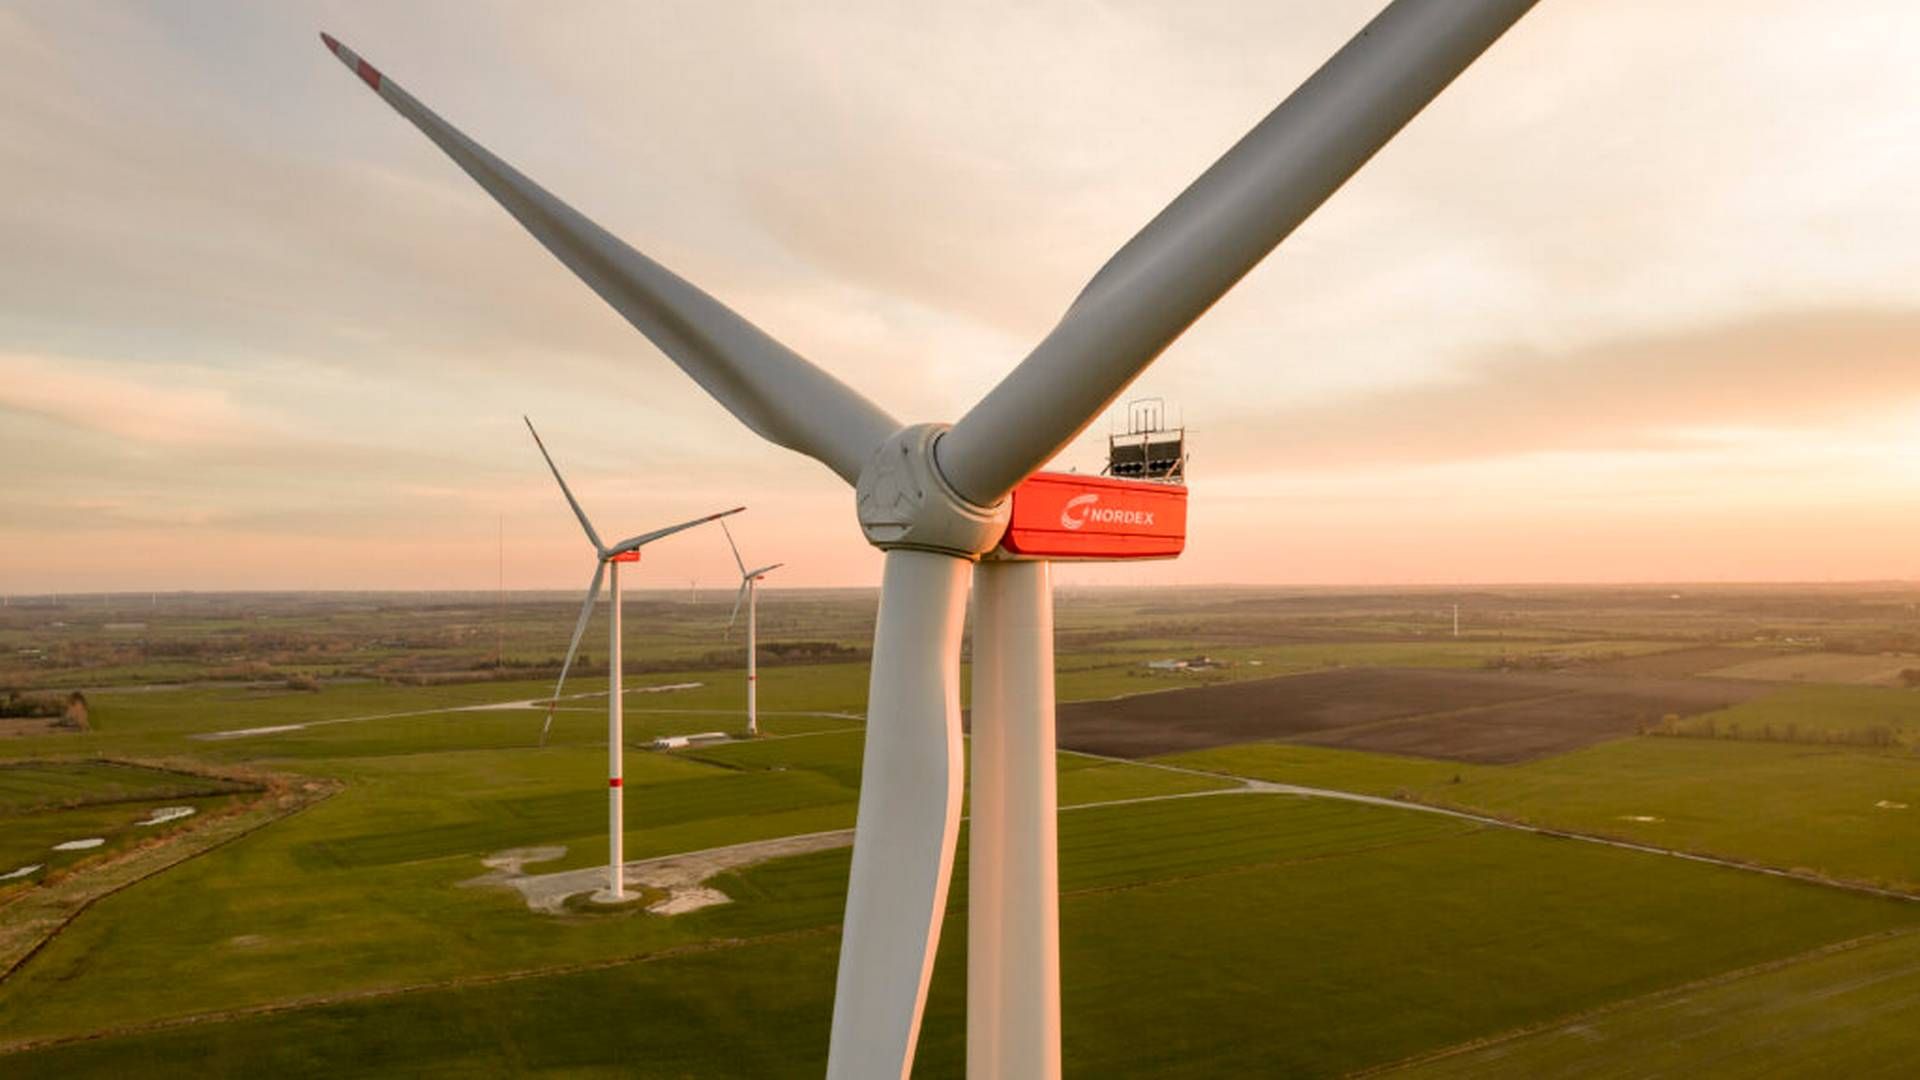 "The orders are not really coming in yet, but I would still like turbine manufacturers to maintain capacity now and expand it if necessary,” says the German Minister for Economic Affairs and Climate. | Photo: Nordex